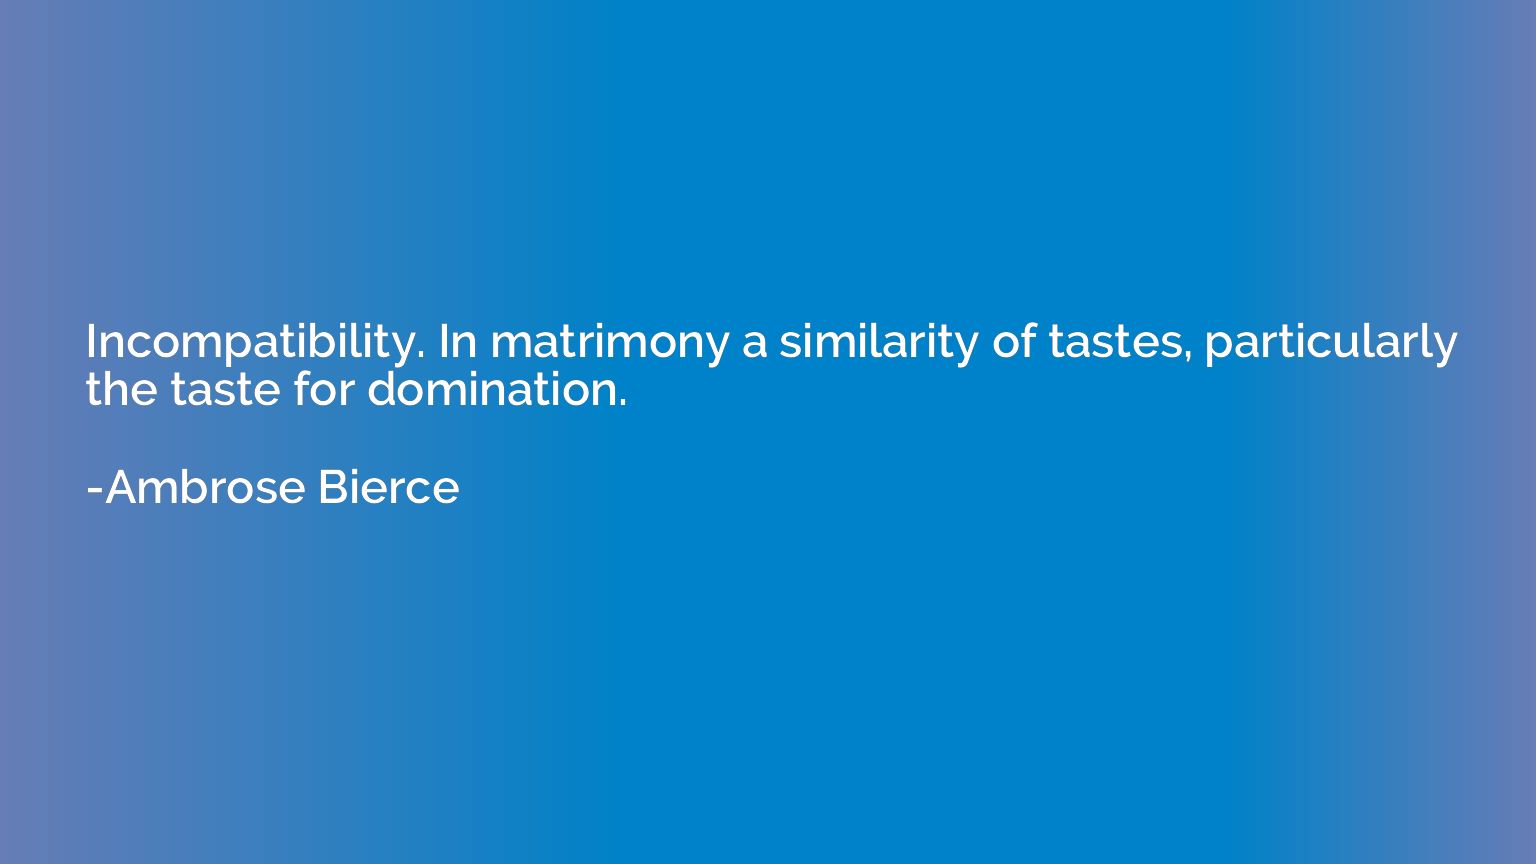 Incompatibility. In matrimony a similarity of tastes, partic